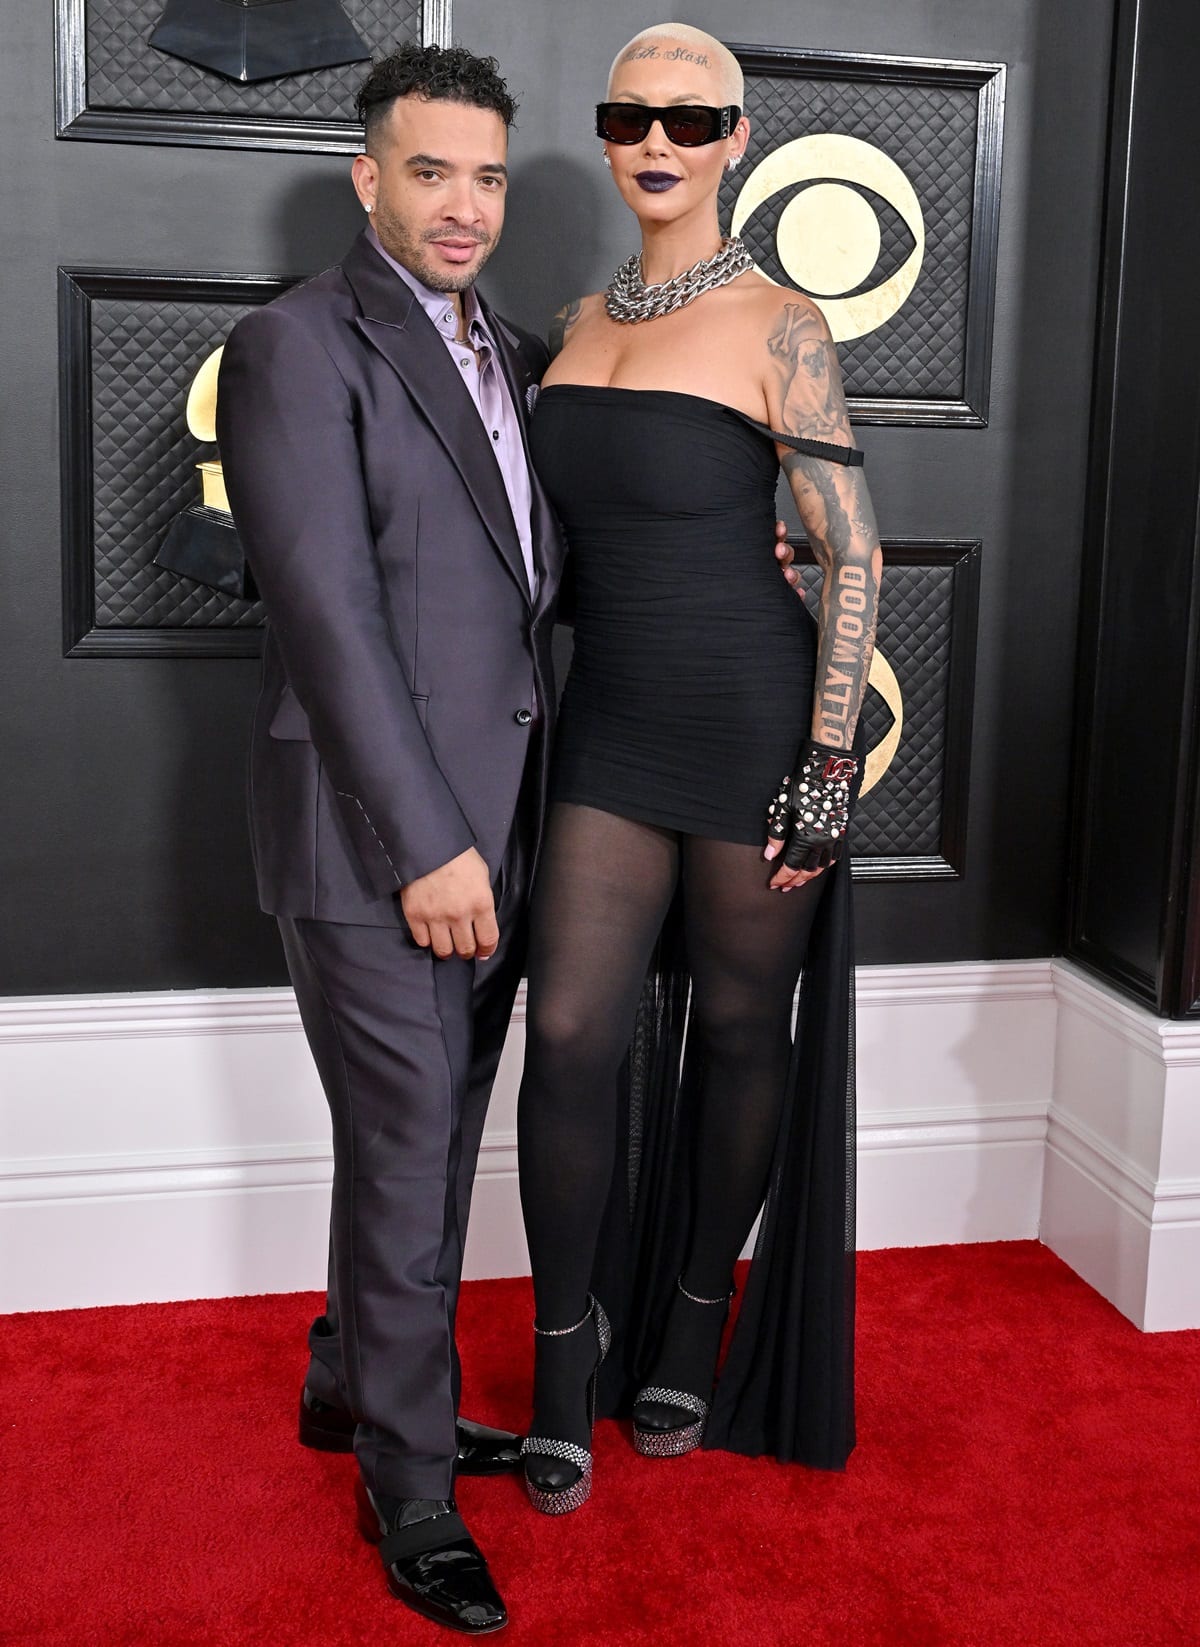 Amber Rose posed for pictures with Hollywood Unlocked blogger Jason Lee at the 2023 Grammy Awards